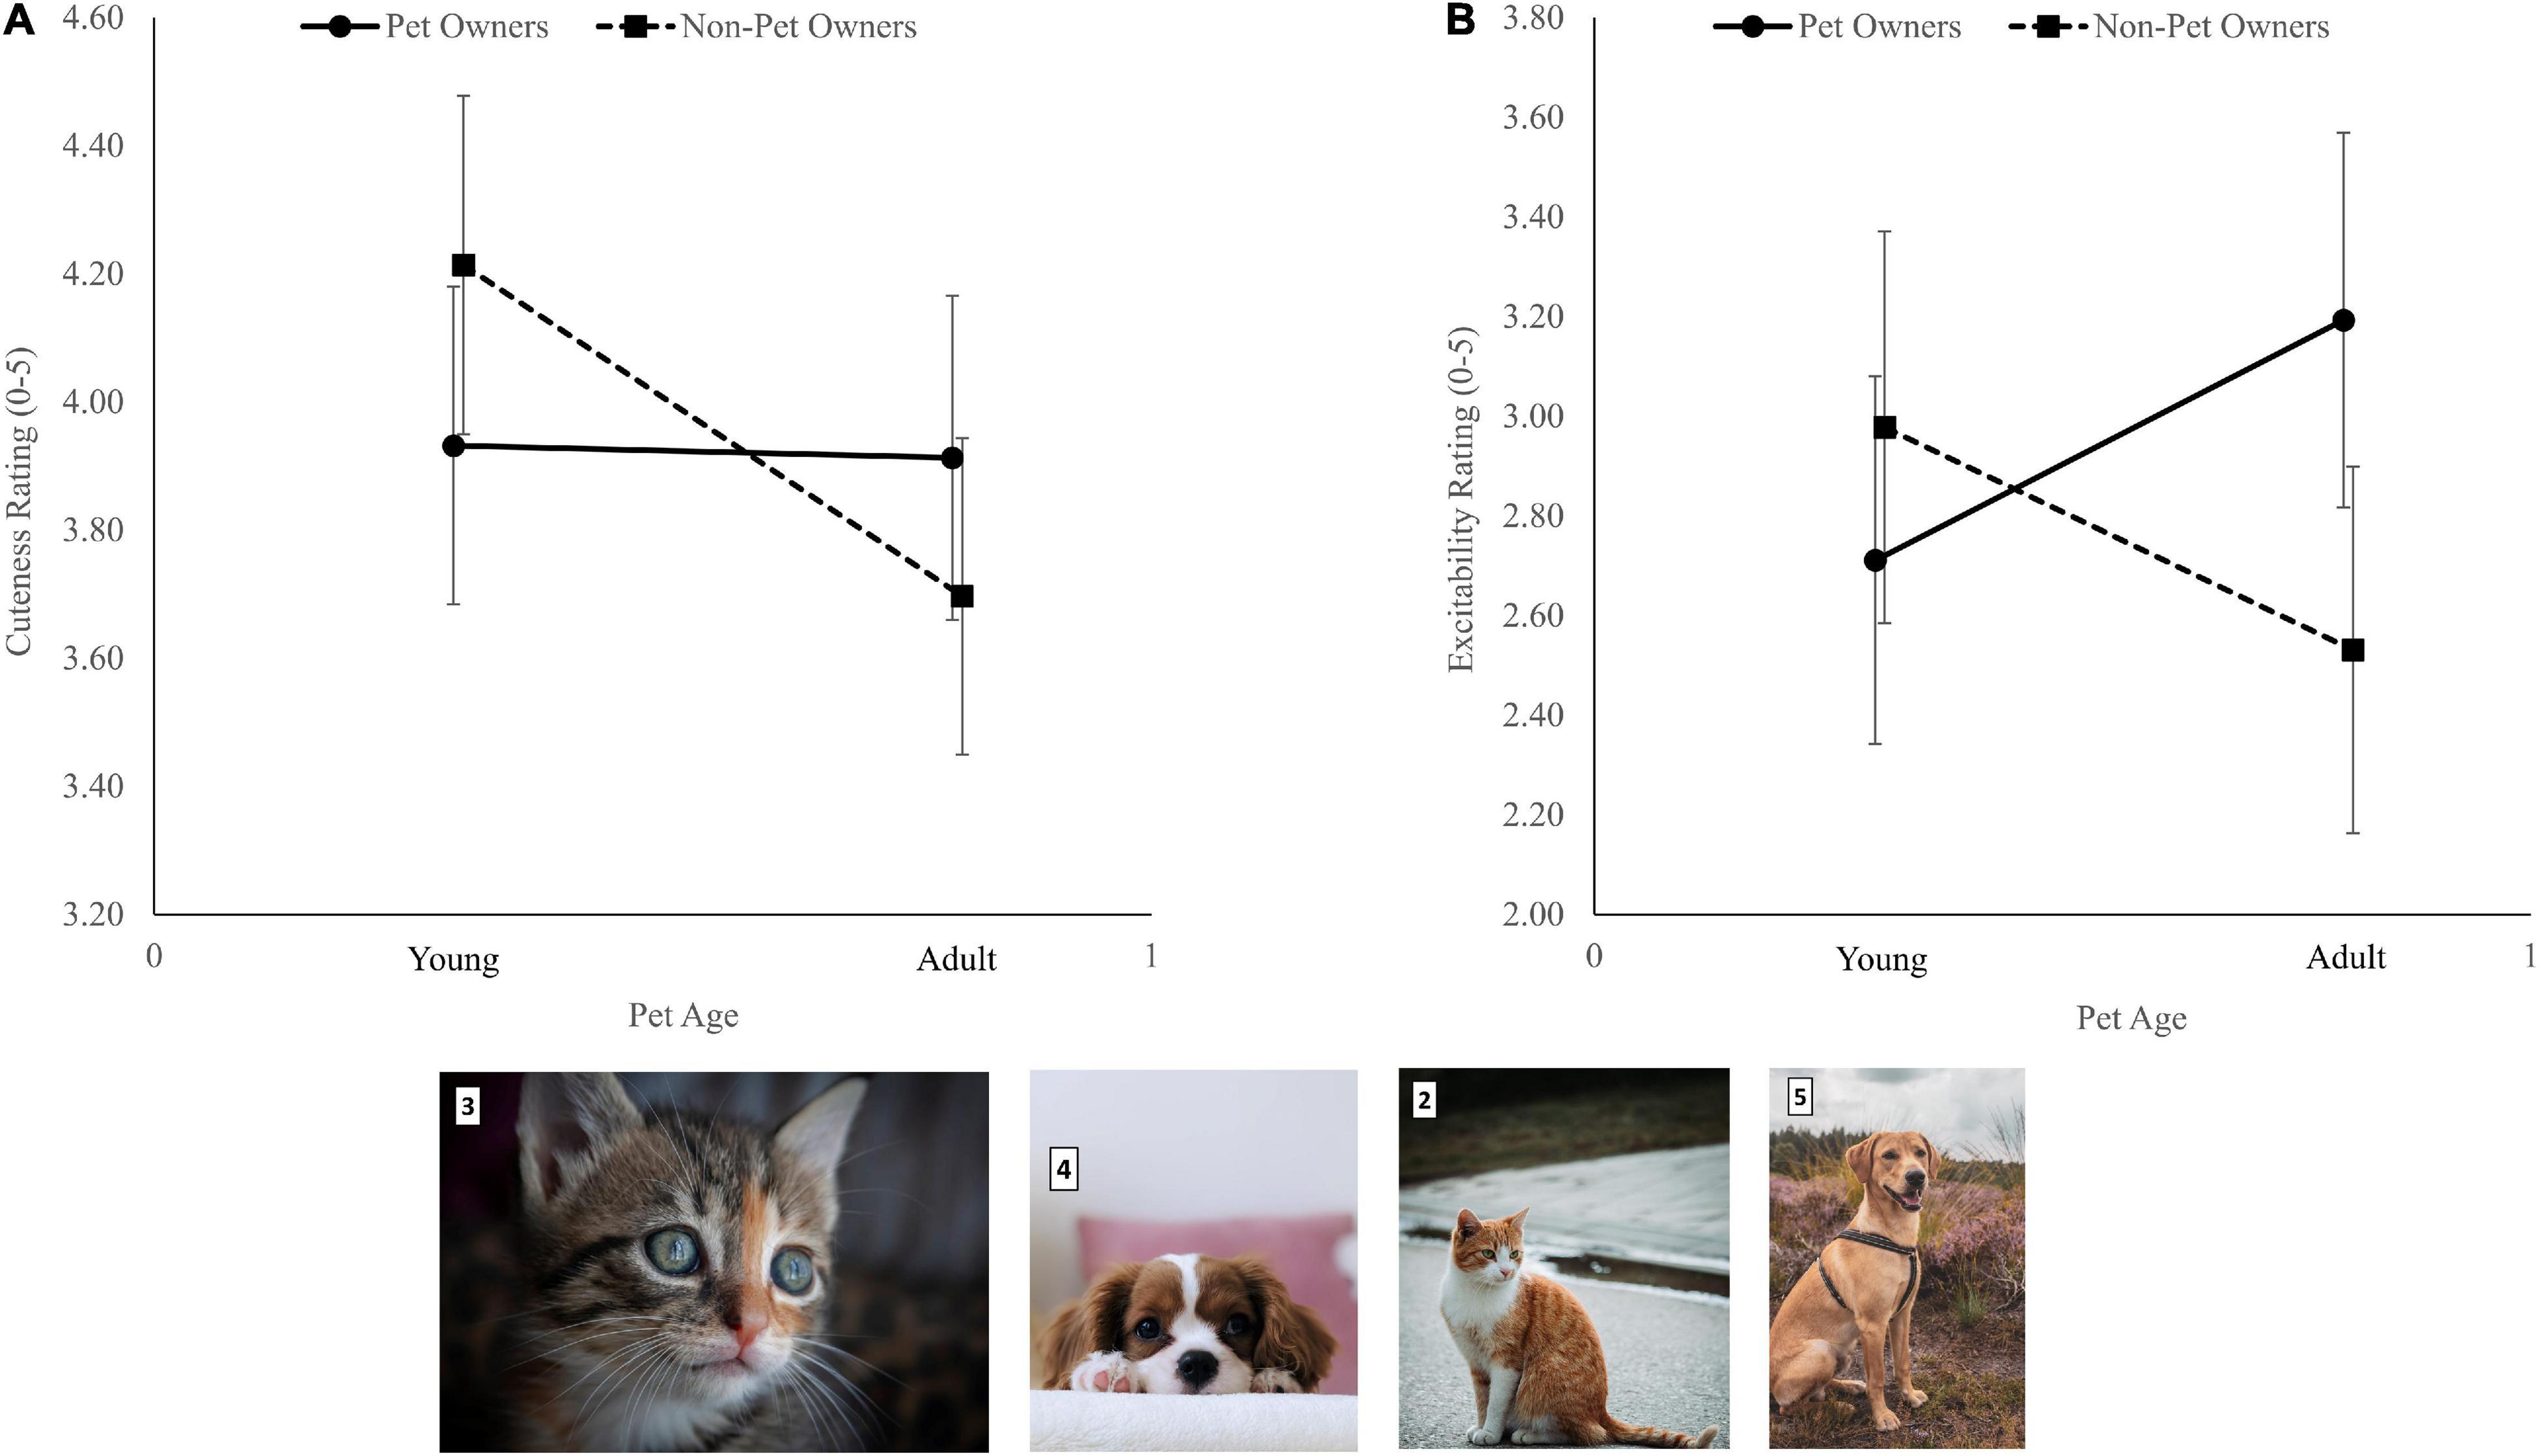 Frontiers | Viewing Cute Images Does Not Affect Performance of ...